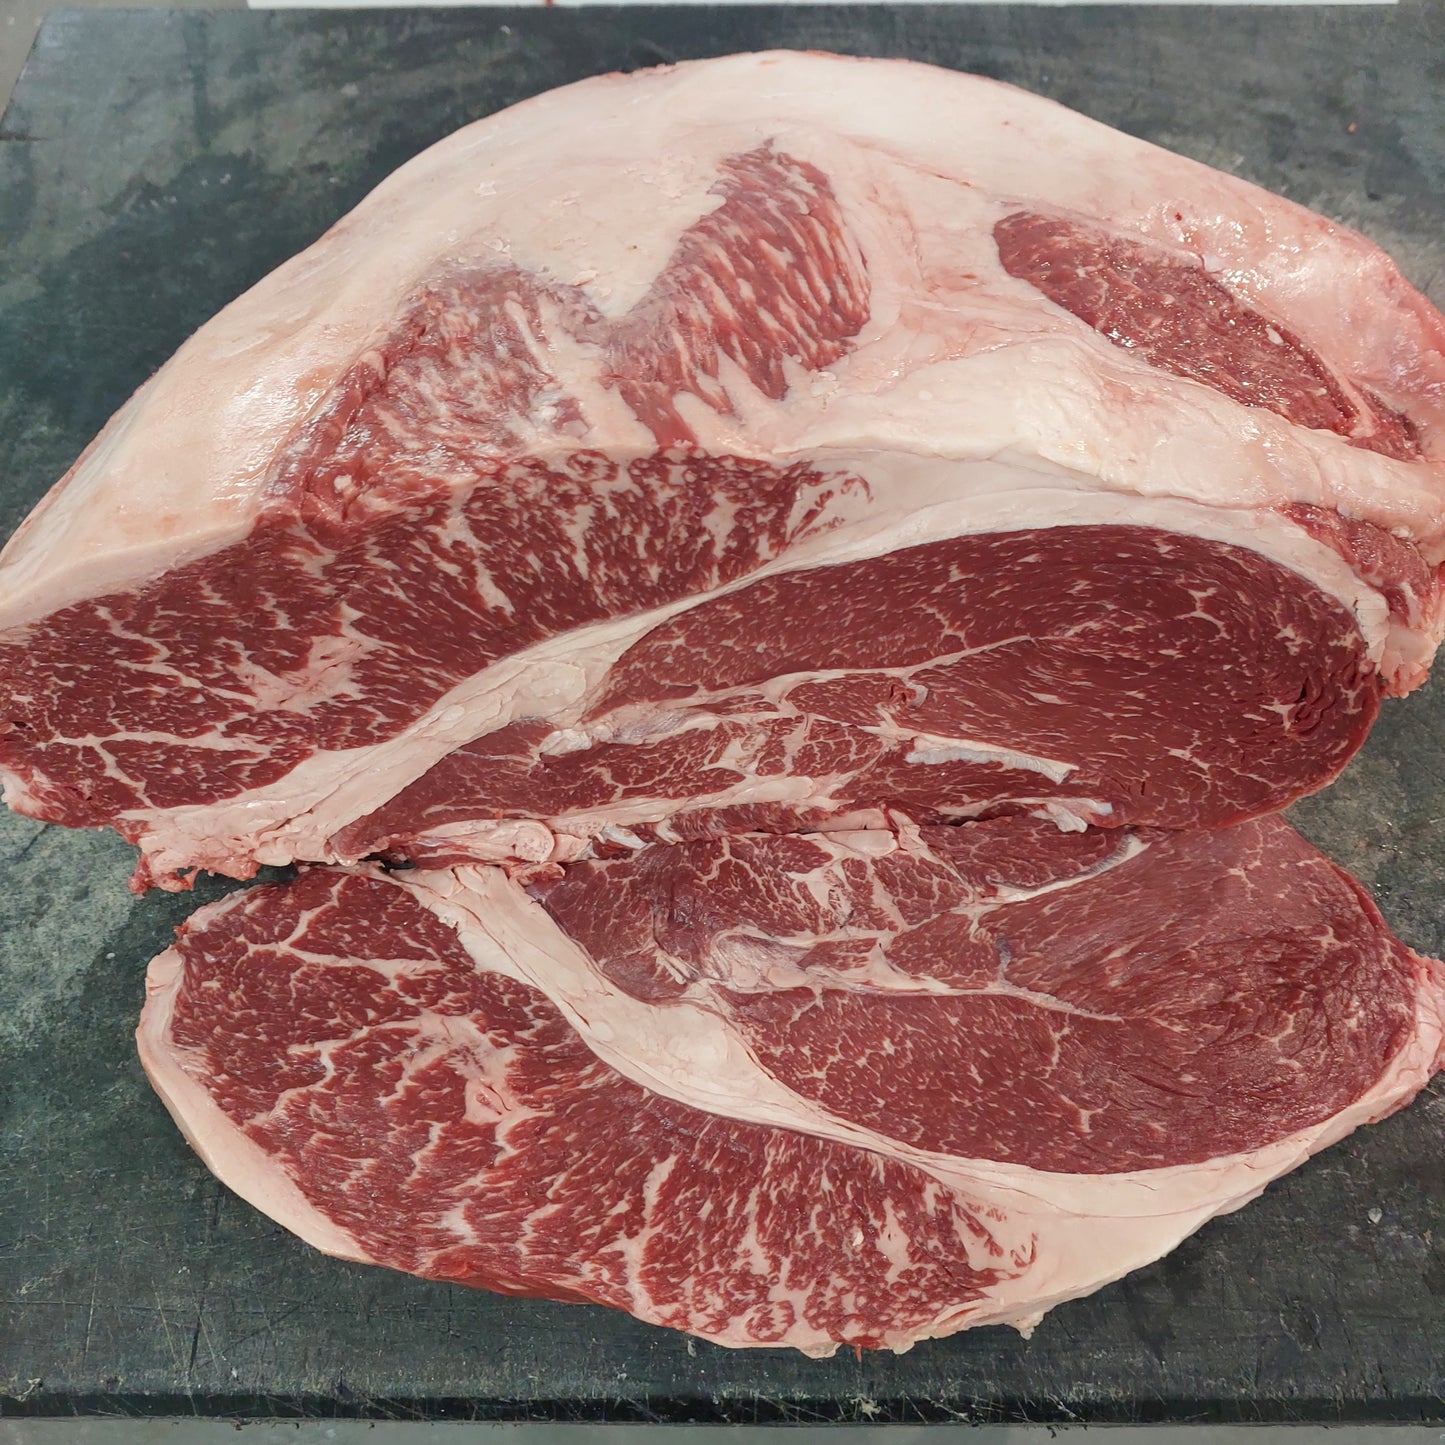 Whole Wagyu Rump MB 4-5 - Approx 5.5kg